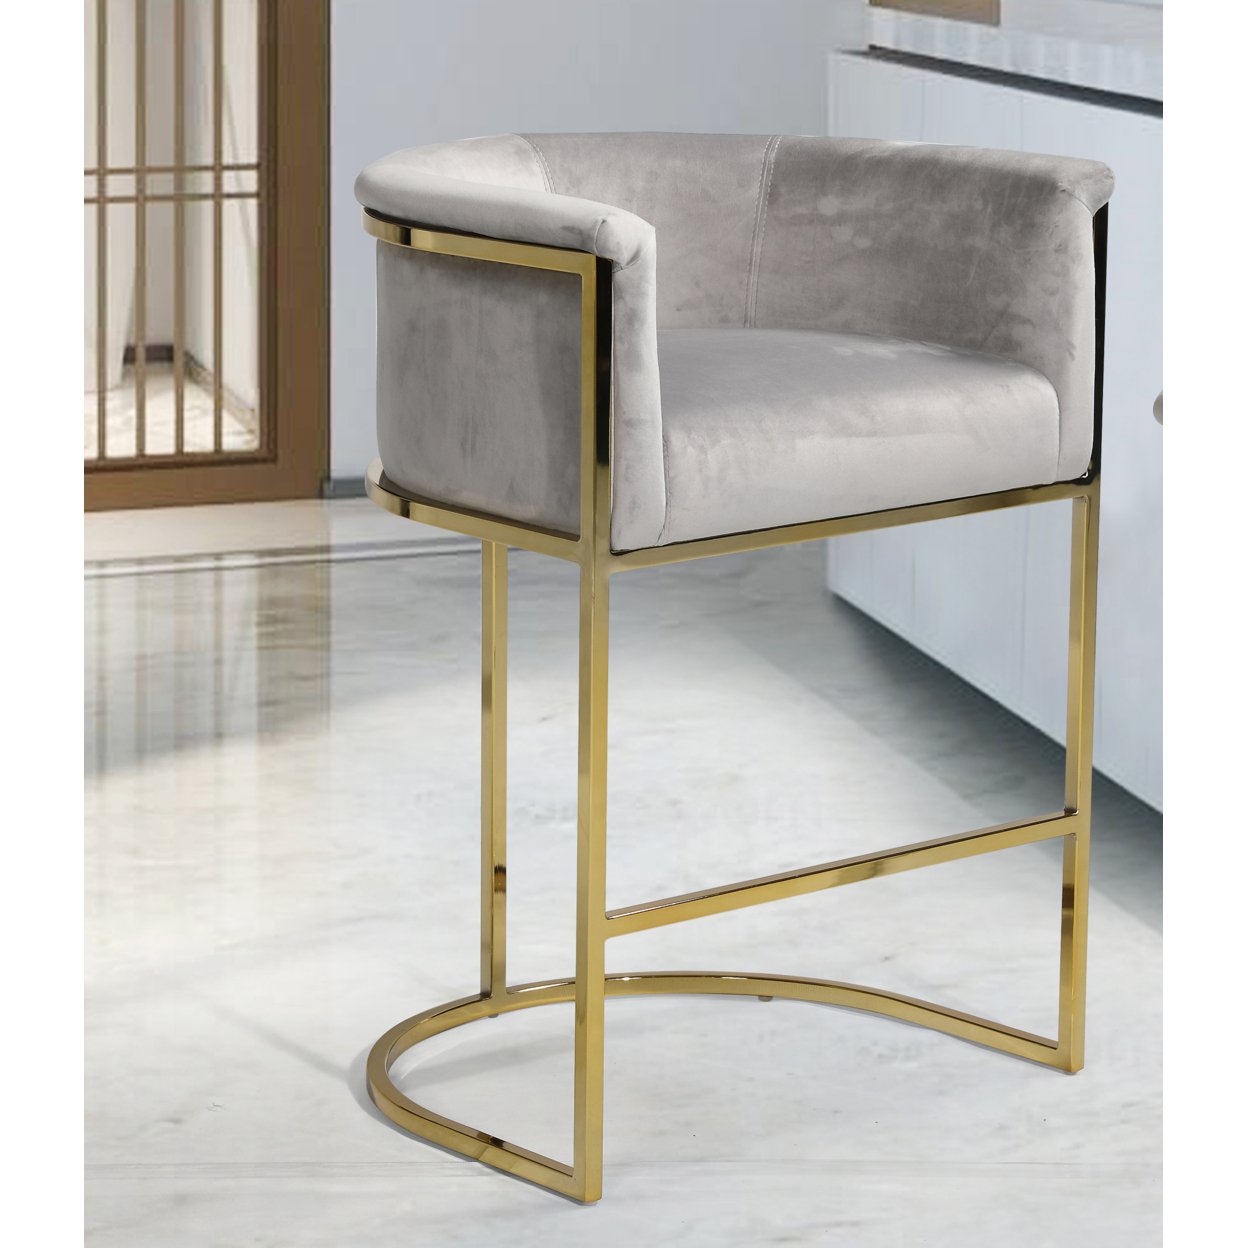 Iconic Home Scout Counter Stool Chair Velvet Upholstered Rolled Shelter Arm Design Half-Moon Goldtone Solid Metal U-Shaped Base - Grey